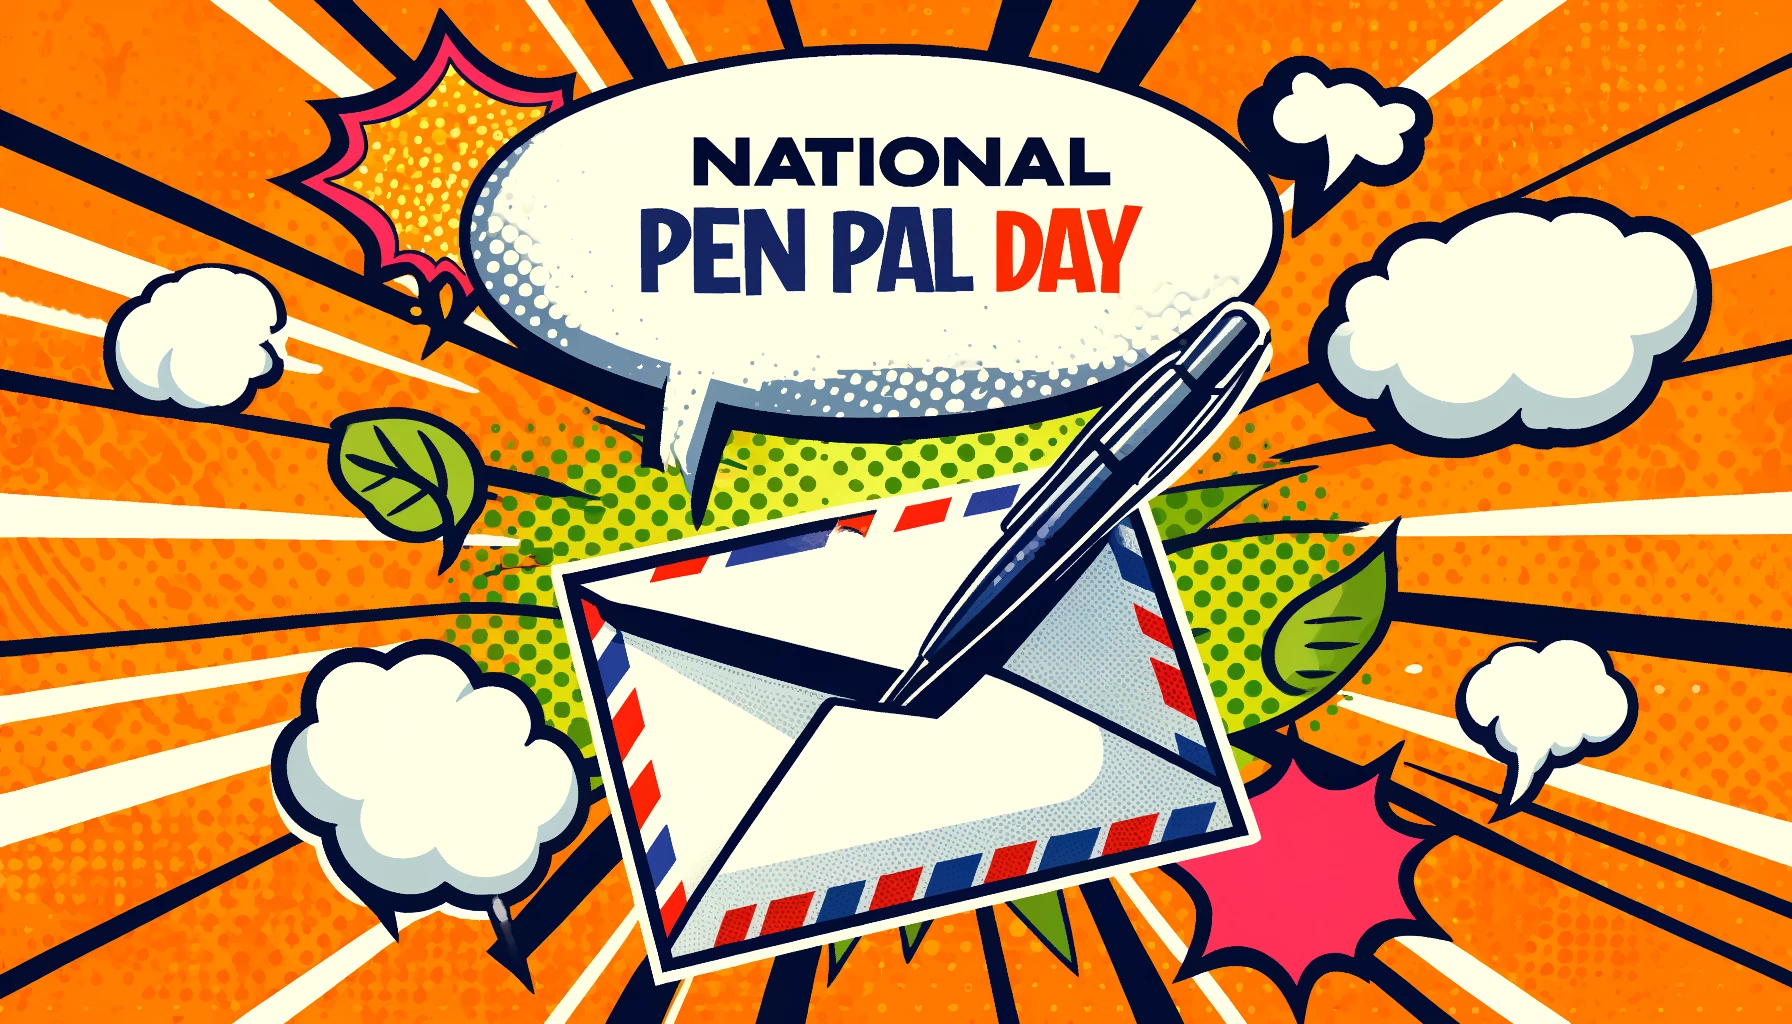 National Pen Pal Day